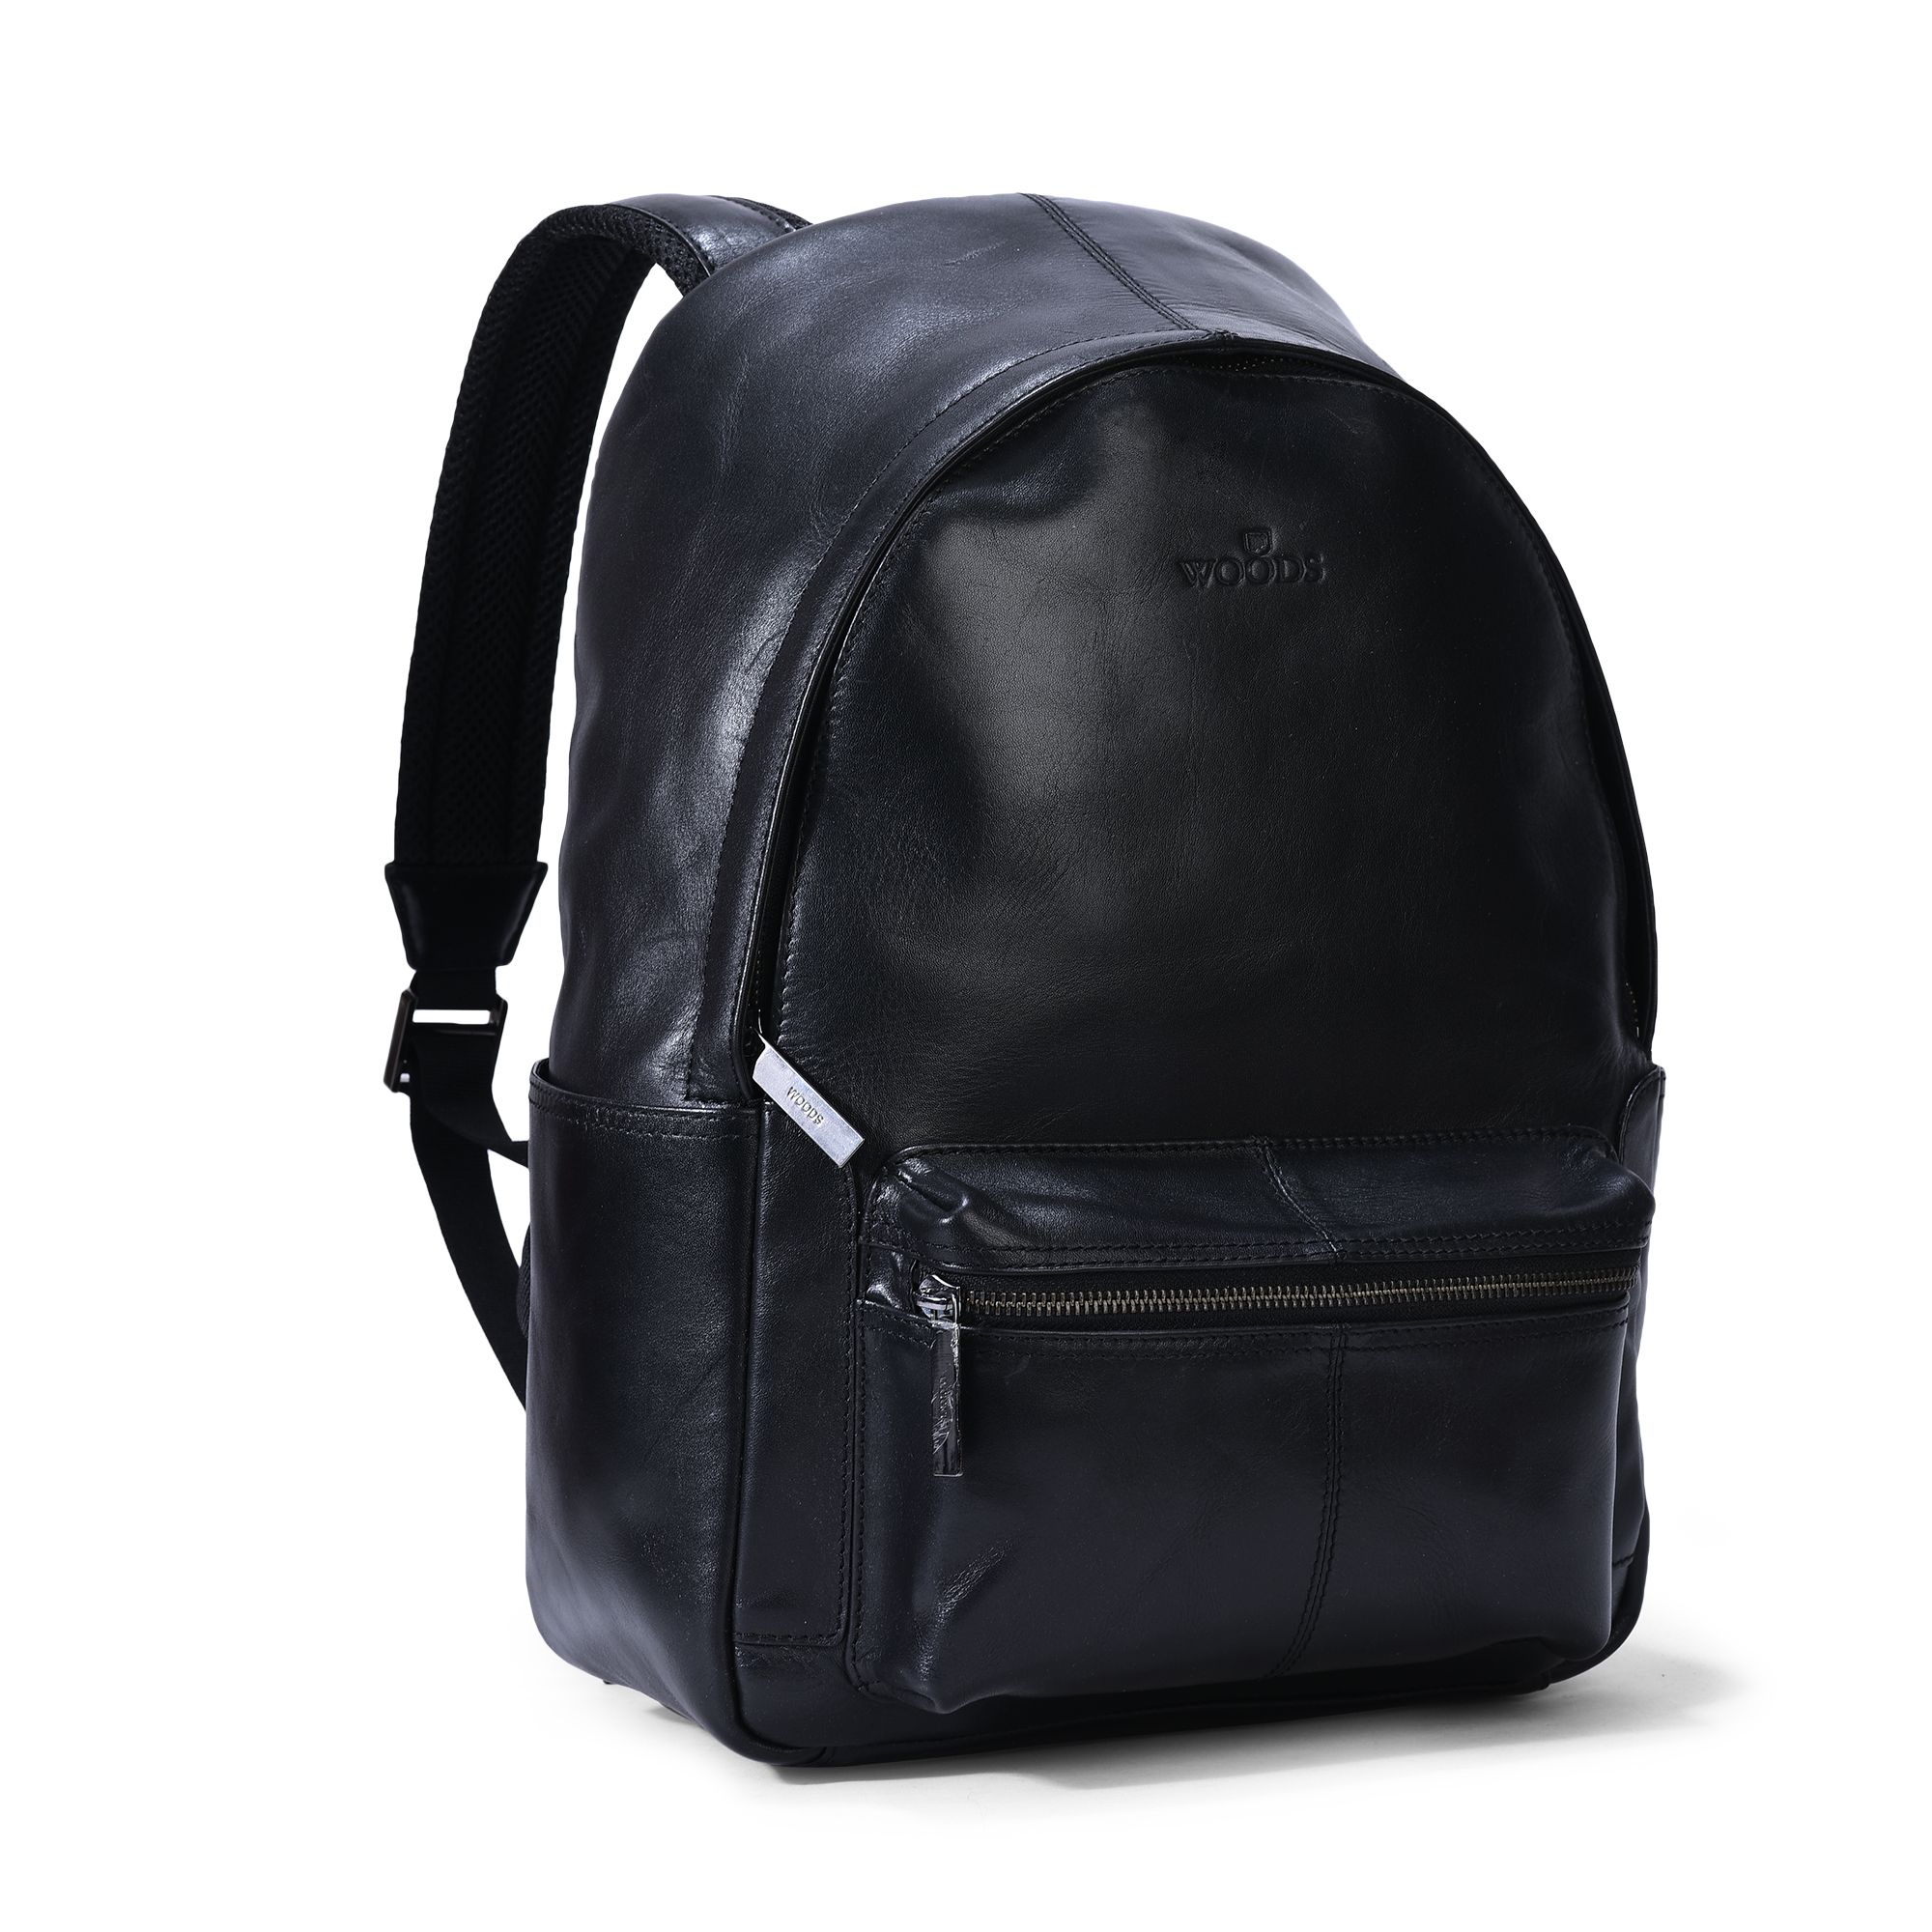 black unisex leather backpack 5 000 mrp 13 995 64 % off prices include ...